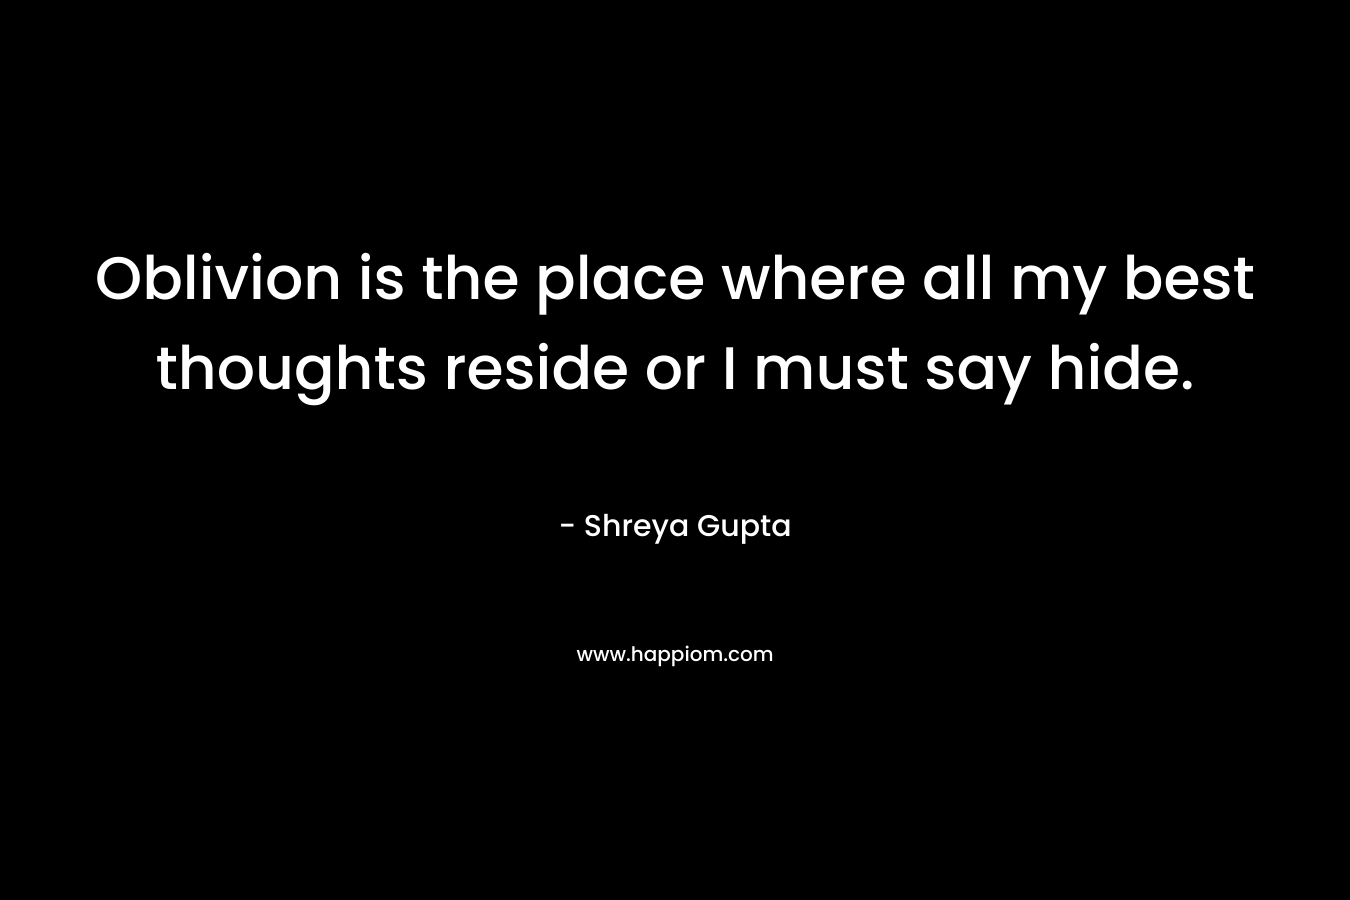 Oblivion is the place where all my best thoughts reside or I must say hide.